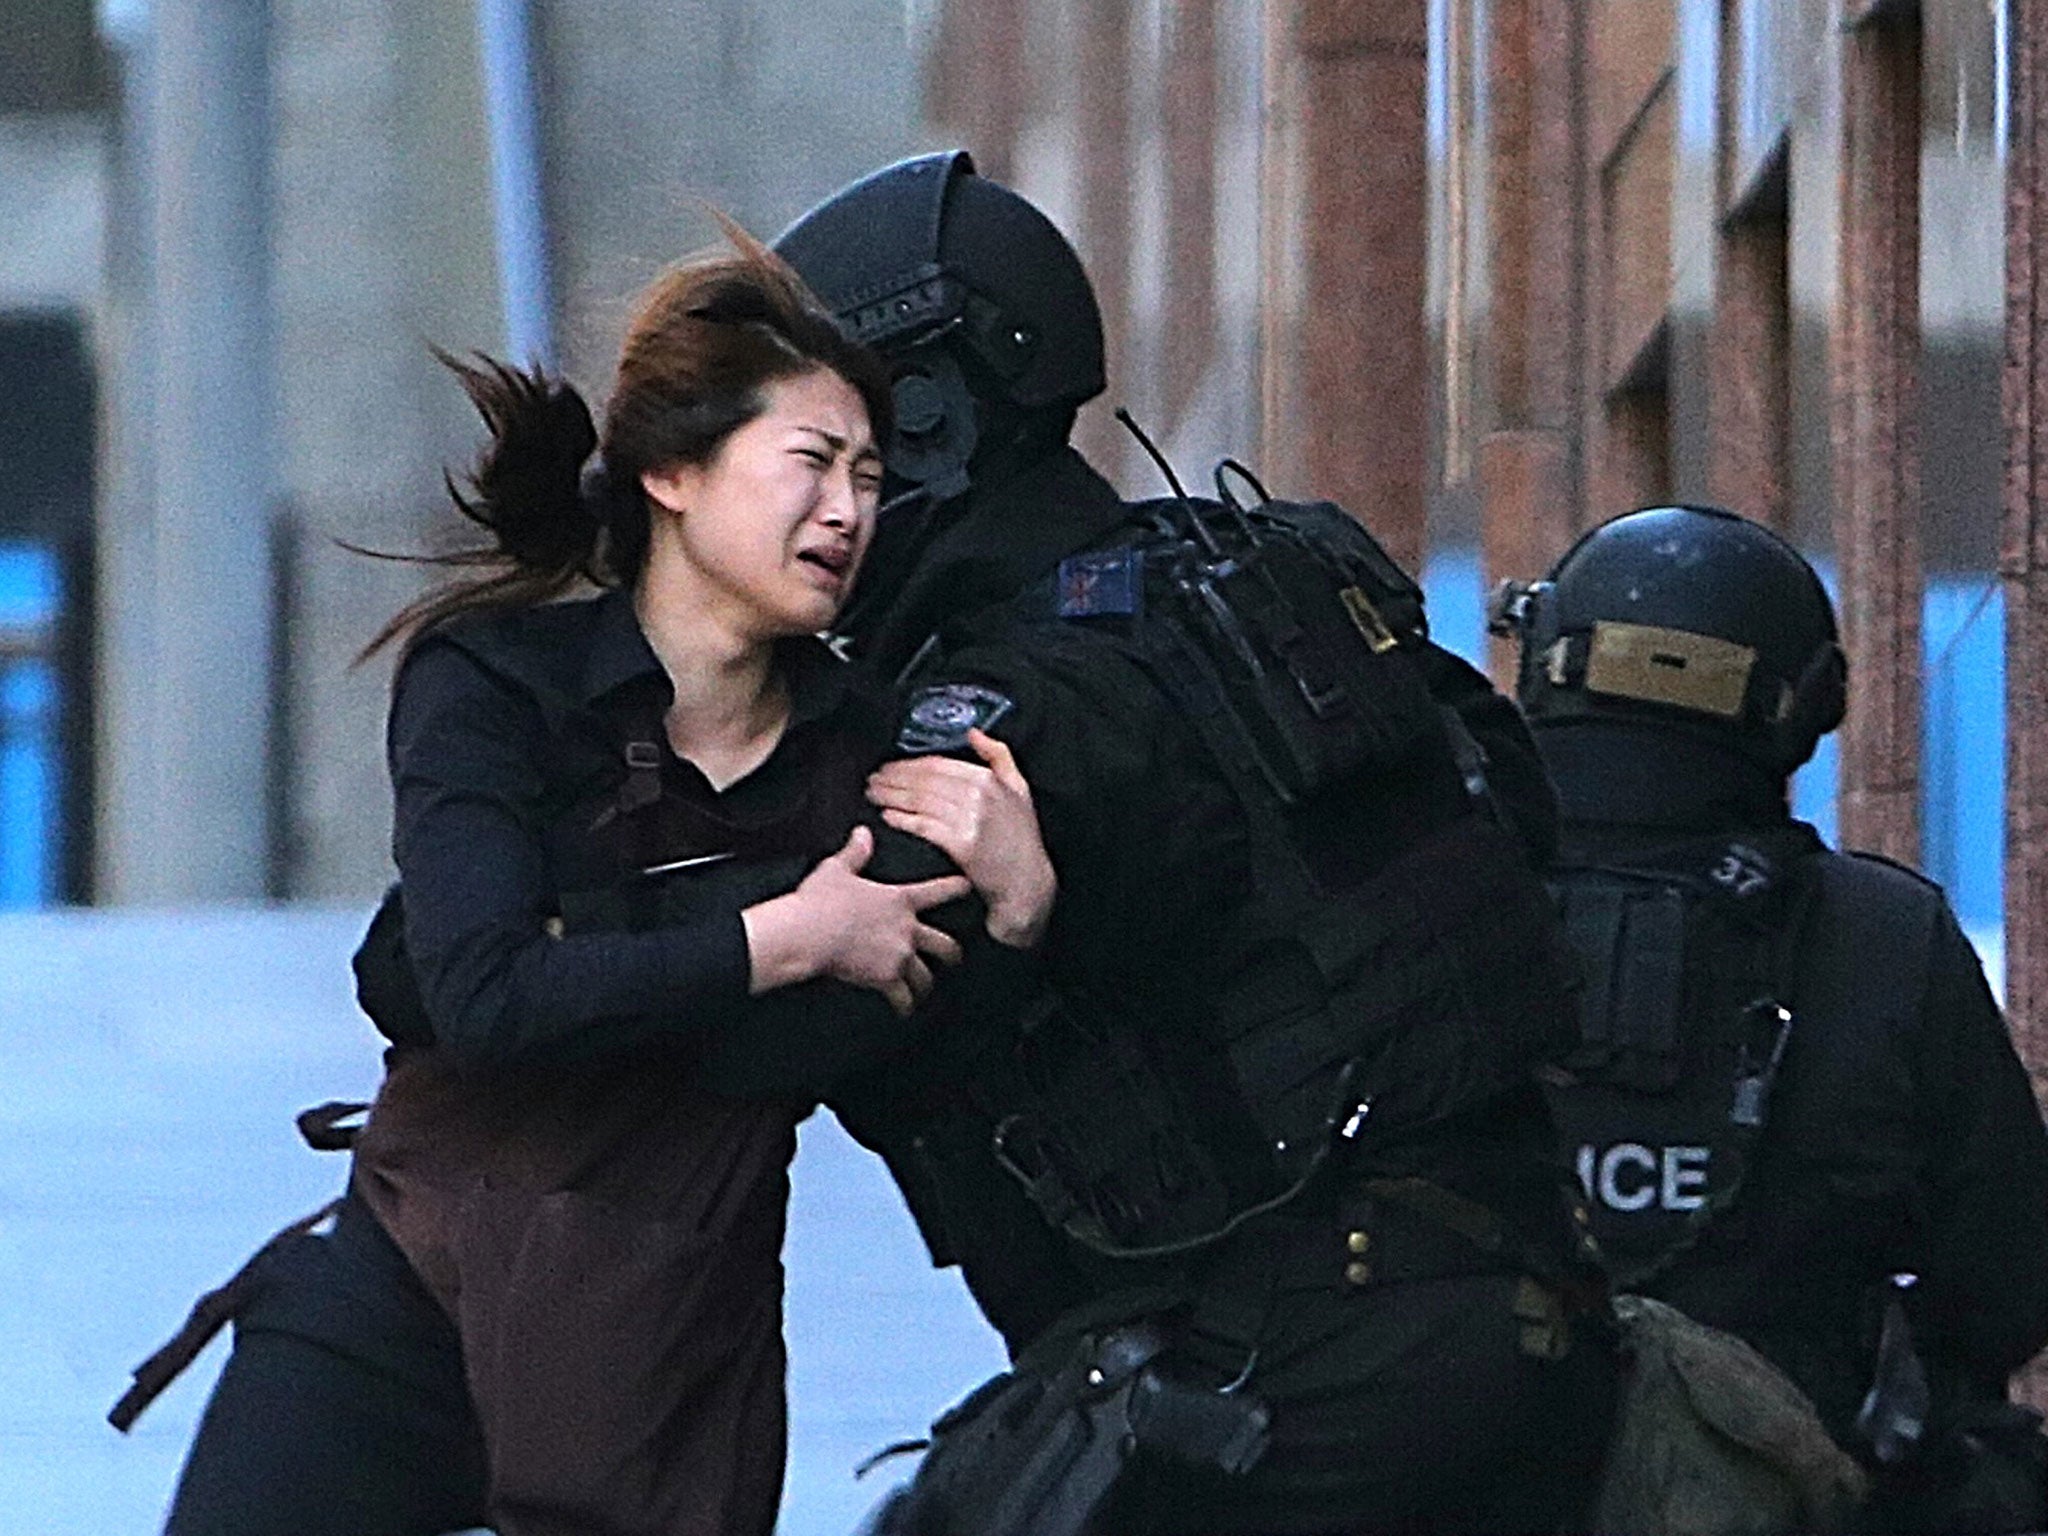 A hostage escapes from the Lindt cafe